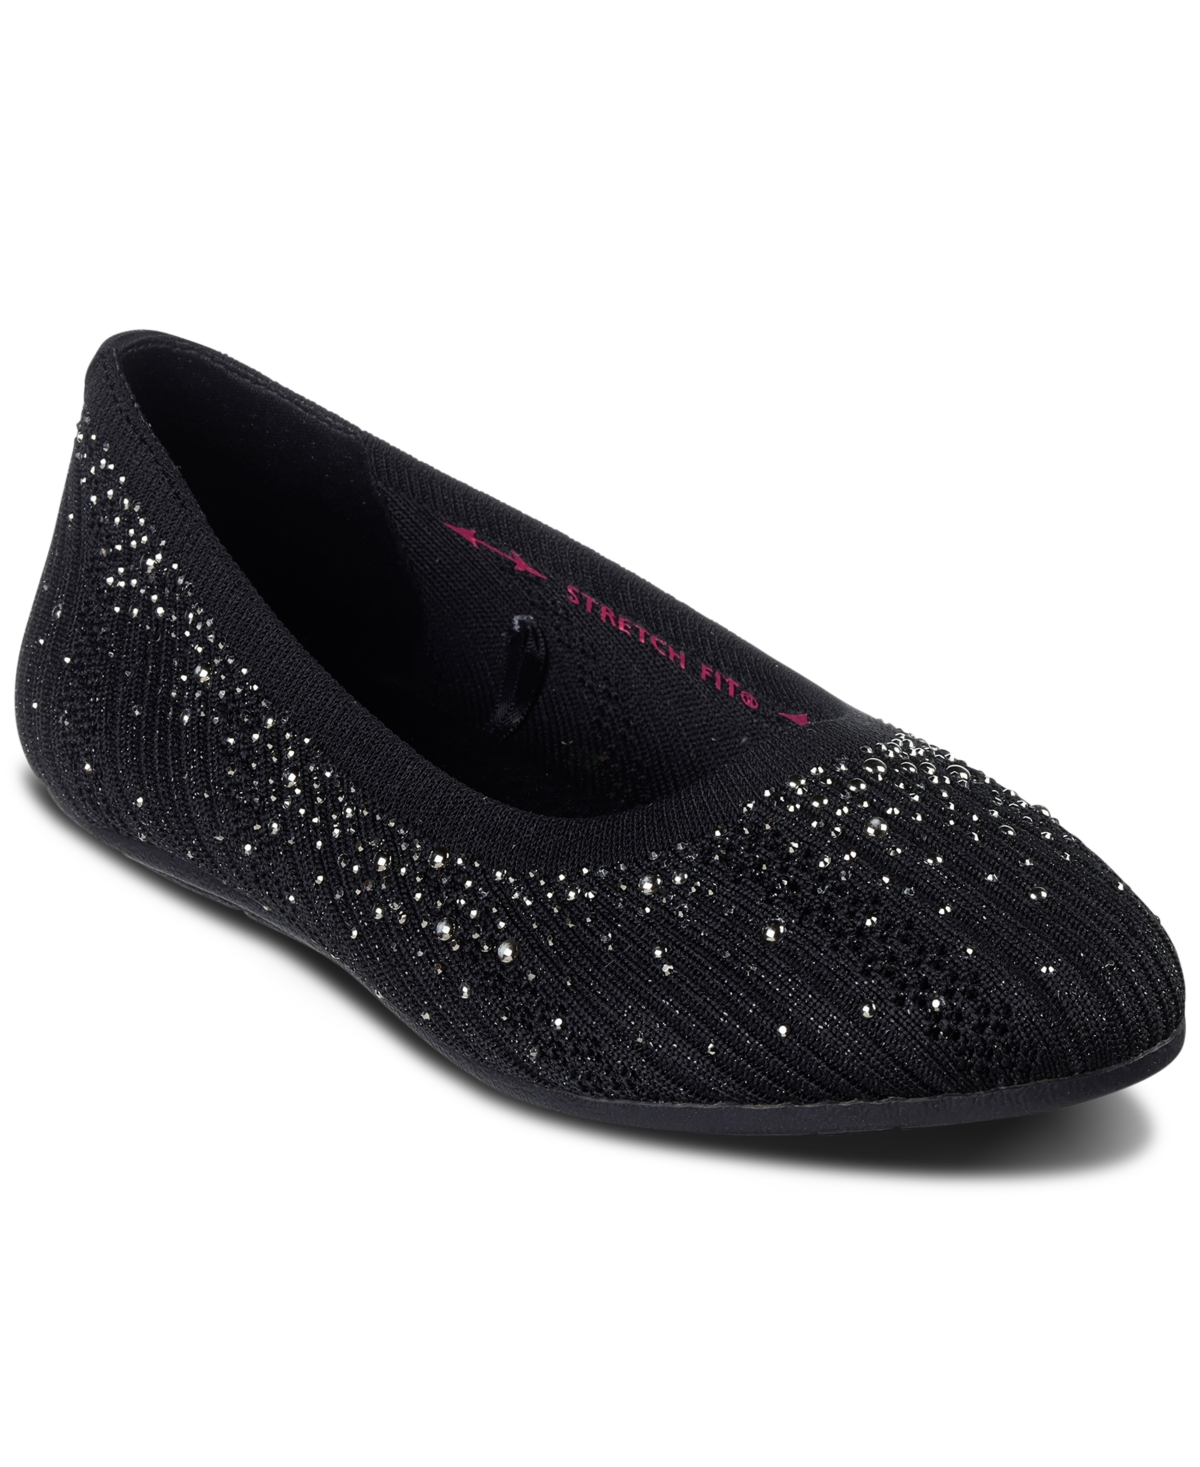 Women's Cleo 2.0 - Glitzy Days Slip-On Casual Ballet Flats from Finish Line - Black